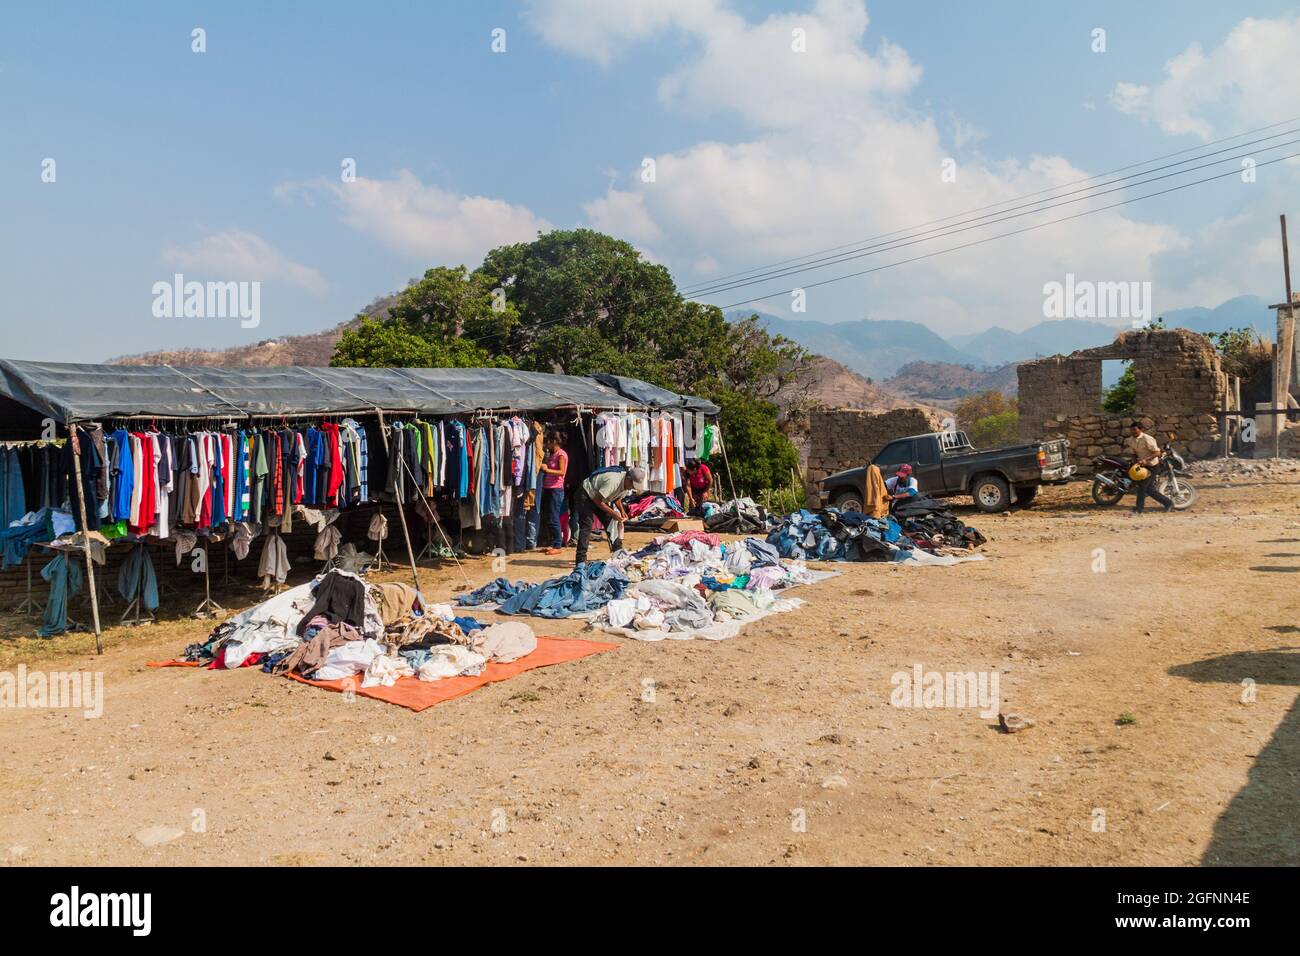 SAN MANUEL DE COLOHETE, HONDURAS - APRIL 15, 2016: Clothing market stall. There is a big market in this village twice a month. Stock Photo